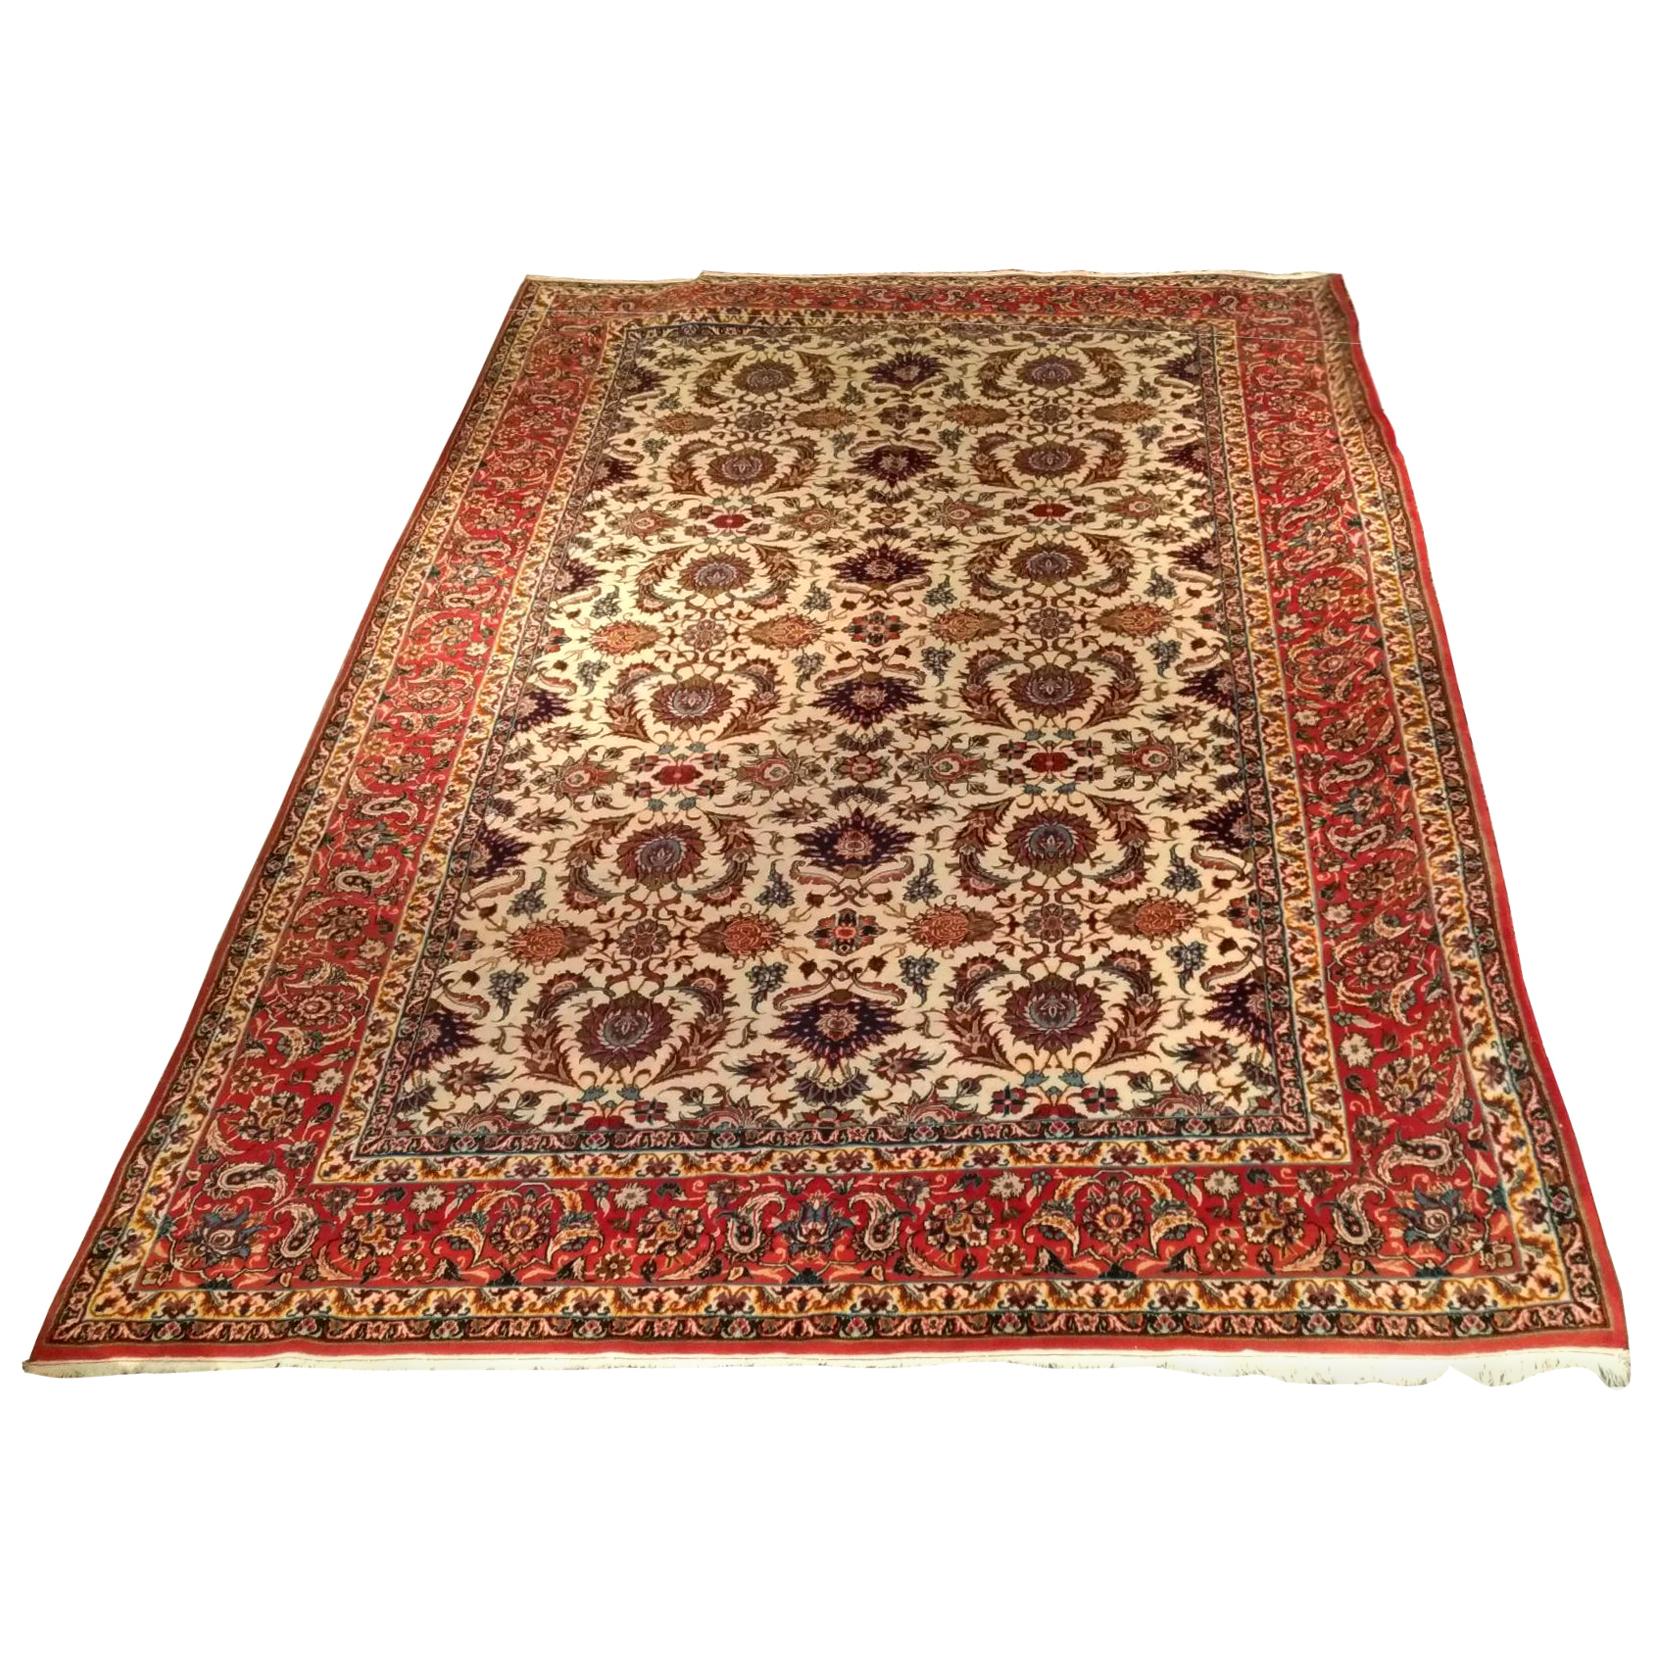 1018 - Beautiful Very Fine Isfahan Carpet, Hand-Knotted For Sale